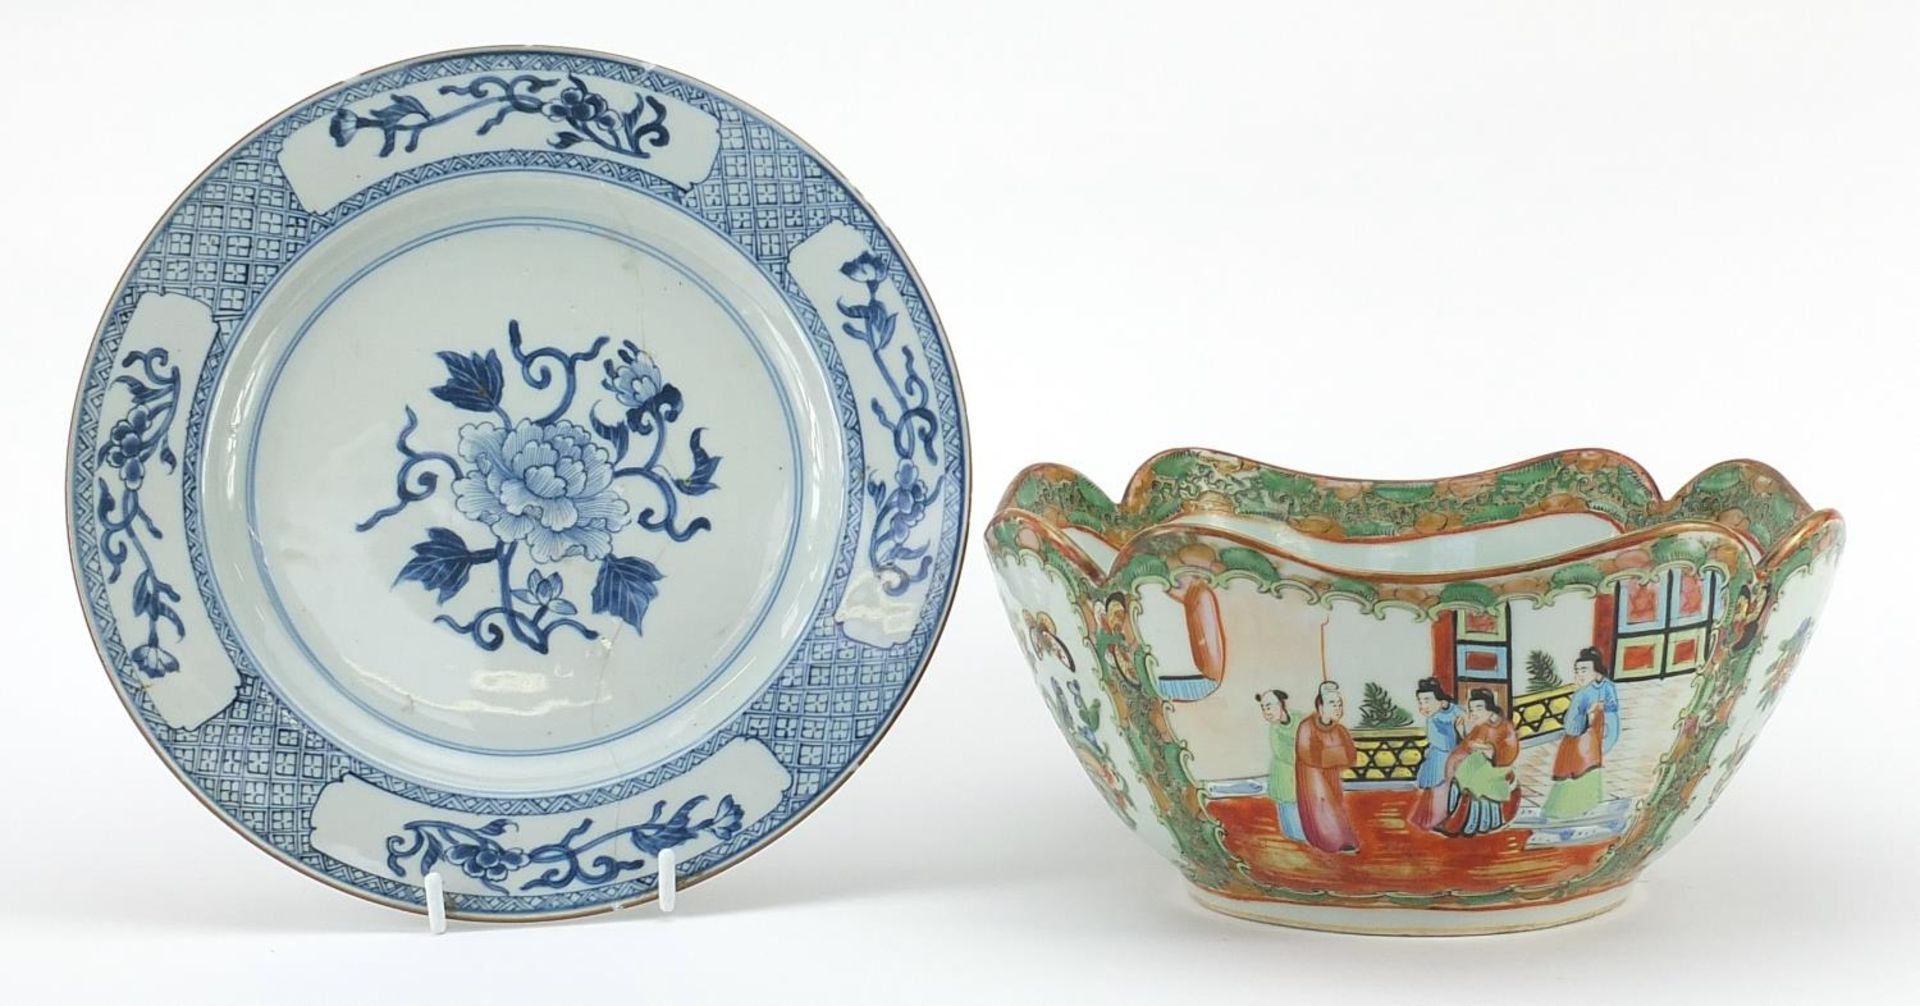 Chinese Canton porcelain bowl and a blue and white plate, the largest 26.5cm in diameter